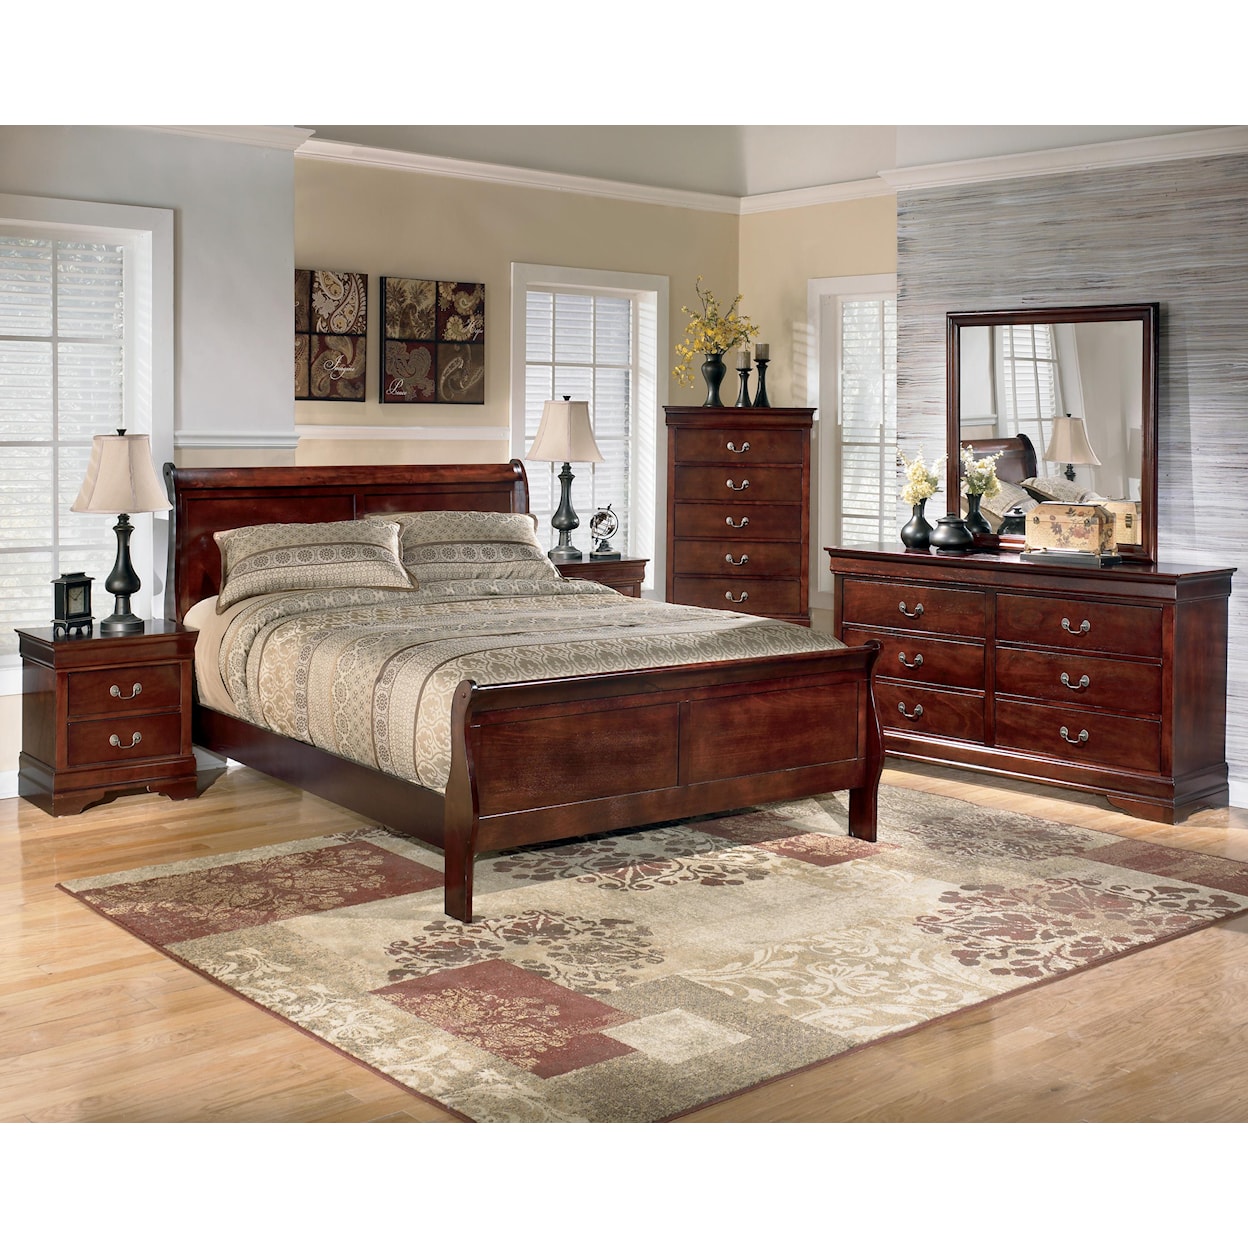 StyleLine REED King Sleigh Bed